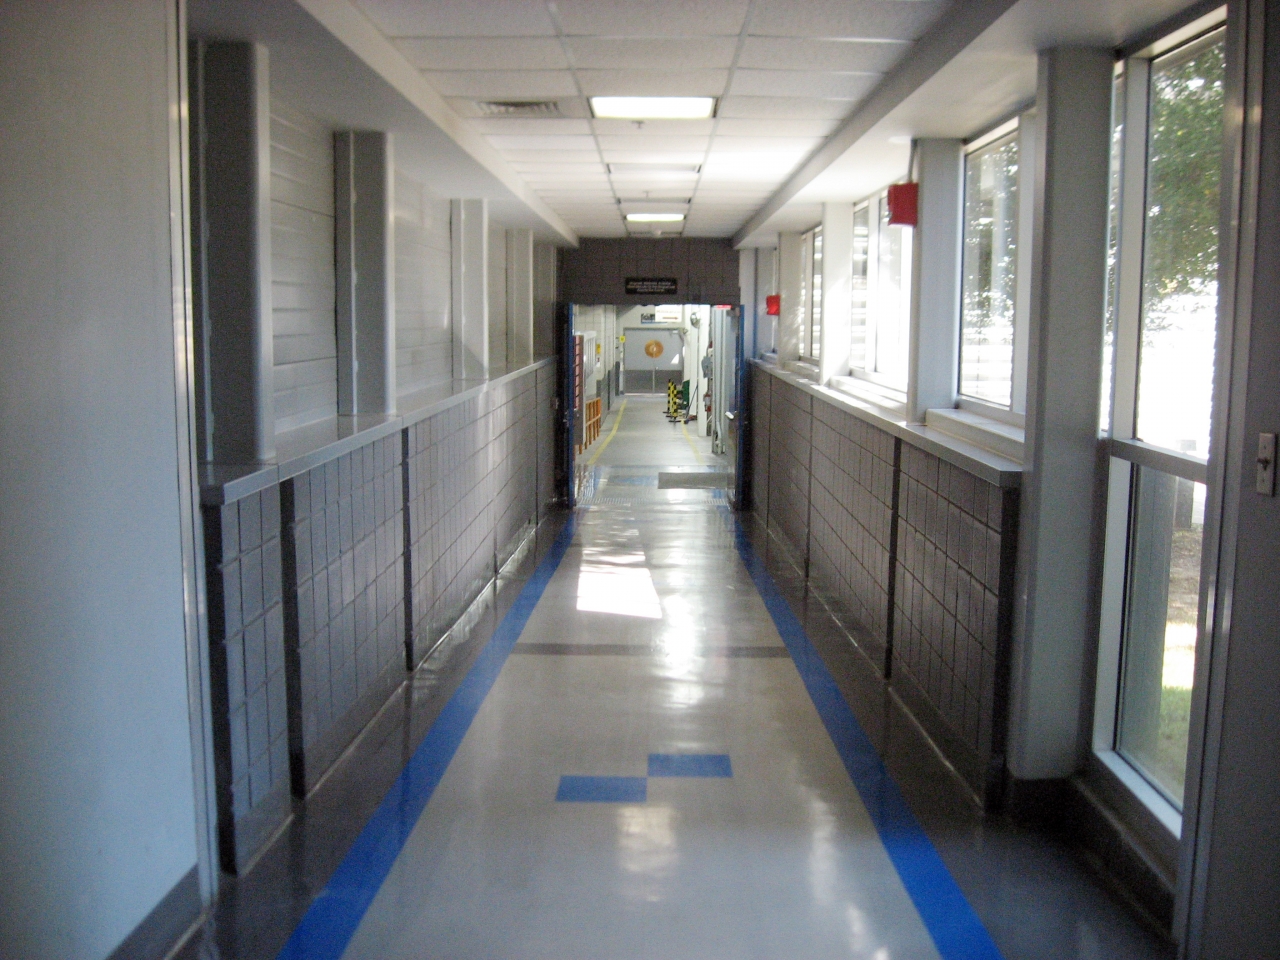 Main corridor to the DC Field wing.